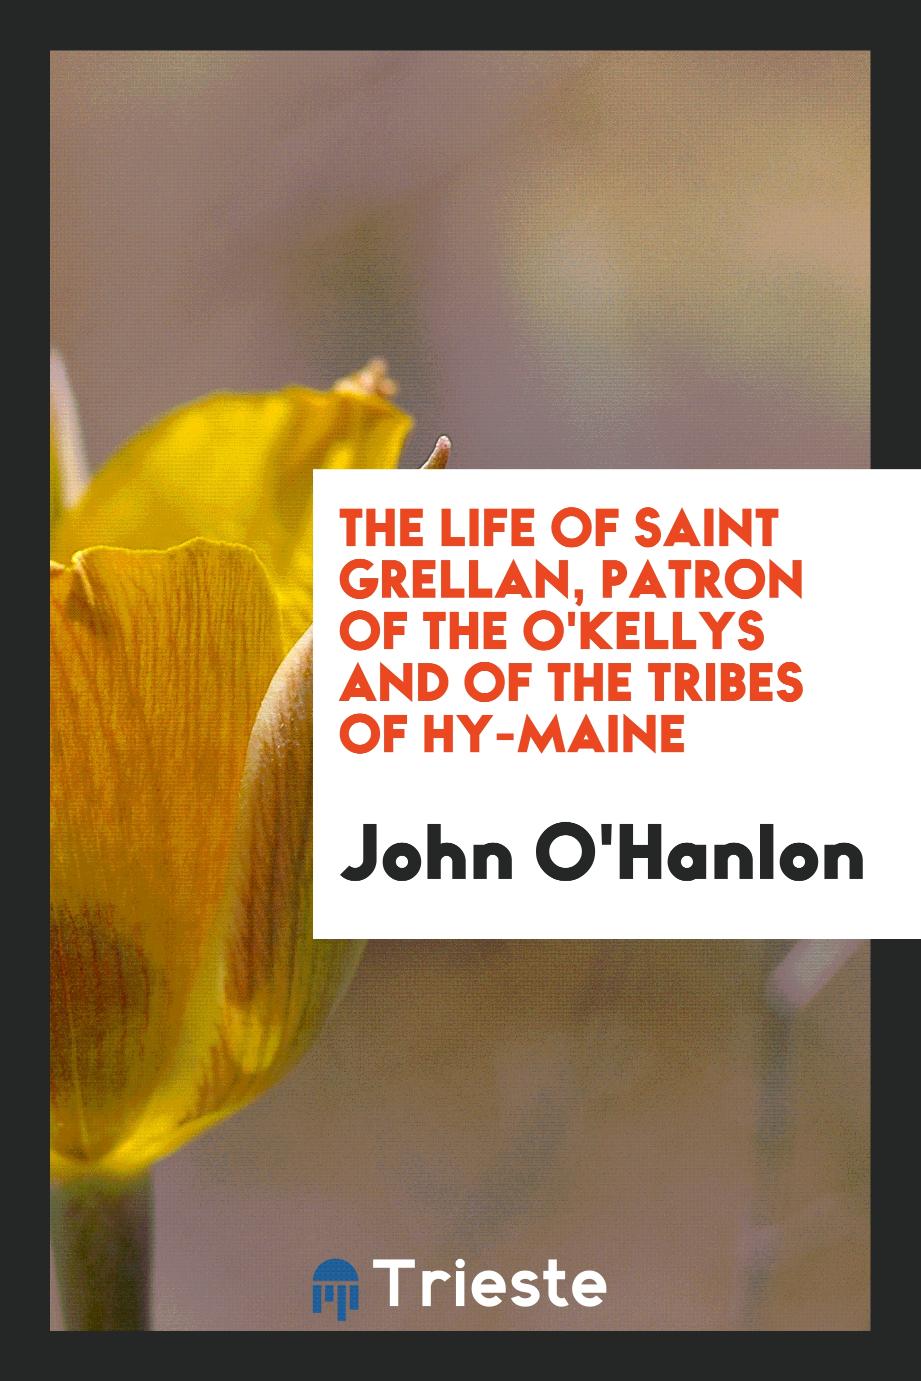 The Life of Saint Grellan, Patron of the O'Kellys and of the Tribes of Hy-Maine